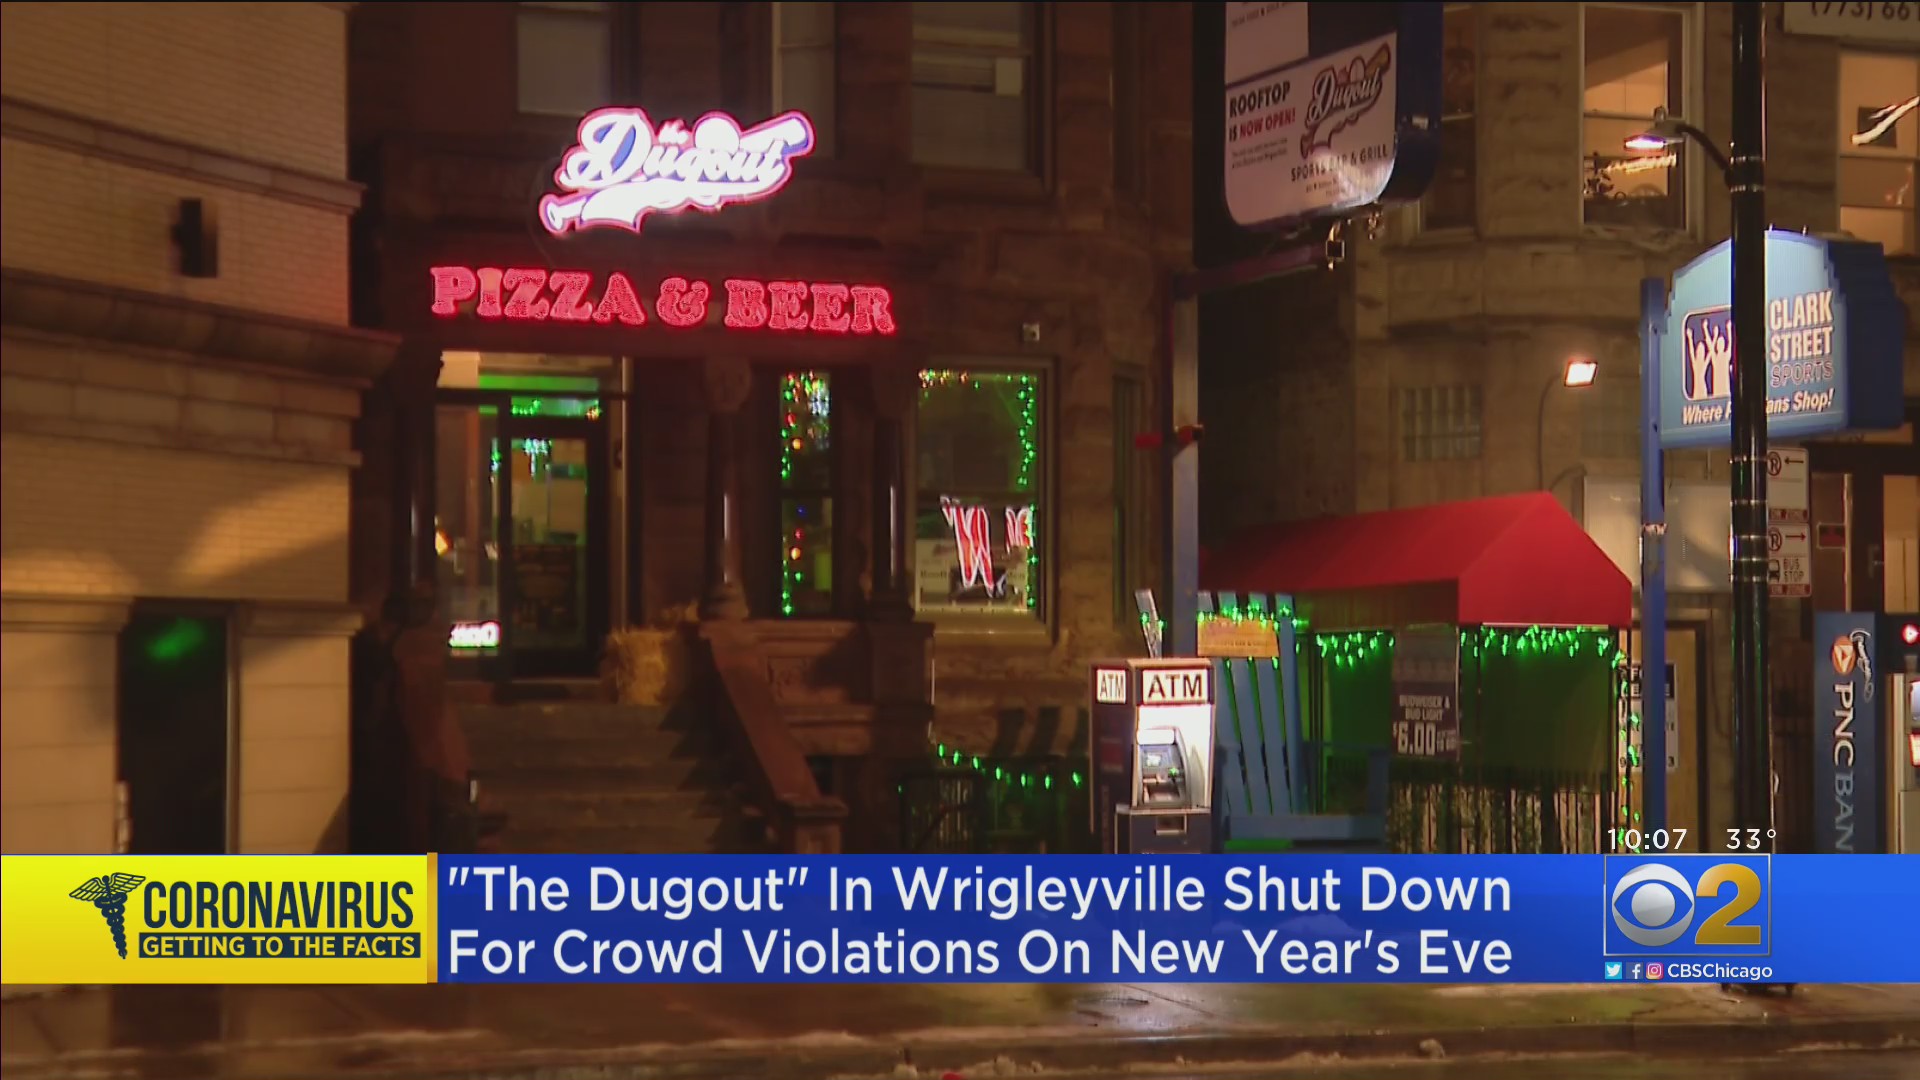 The Dugout In Wrigleyville was closed for mob violations on New Year’s Eve